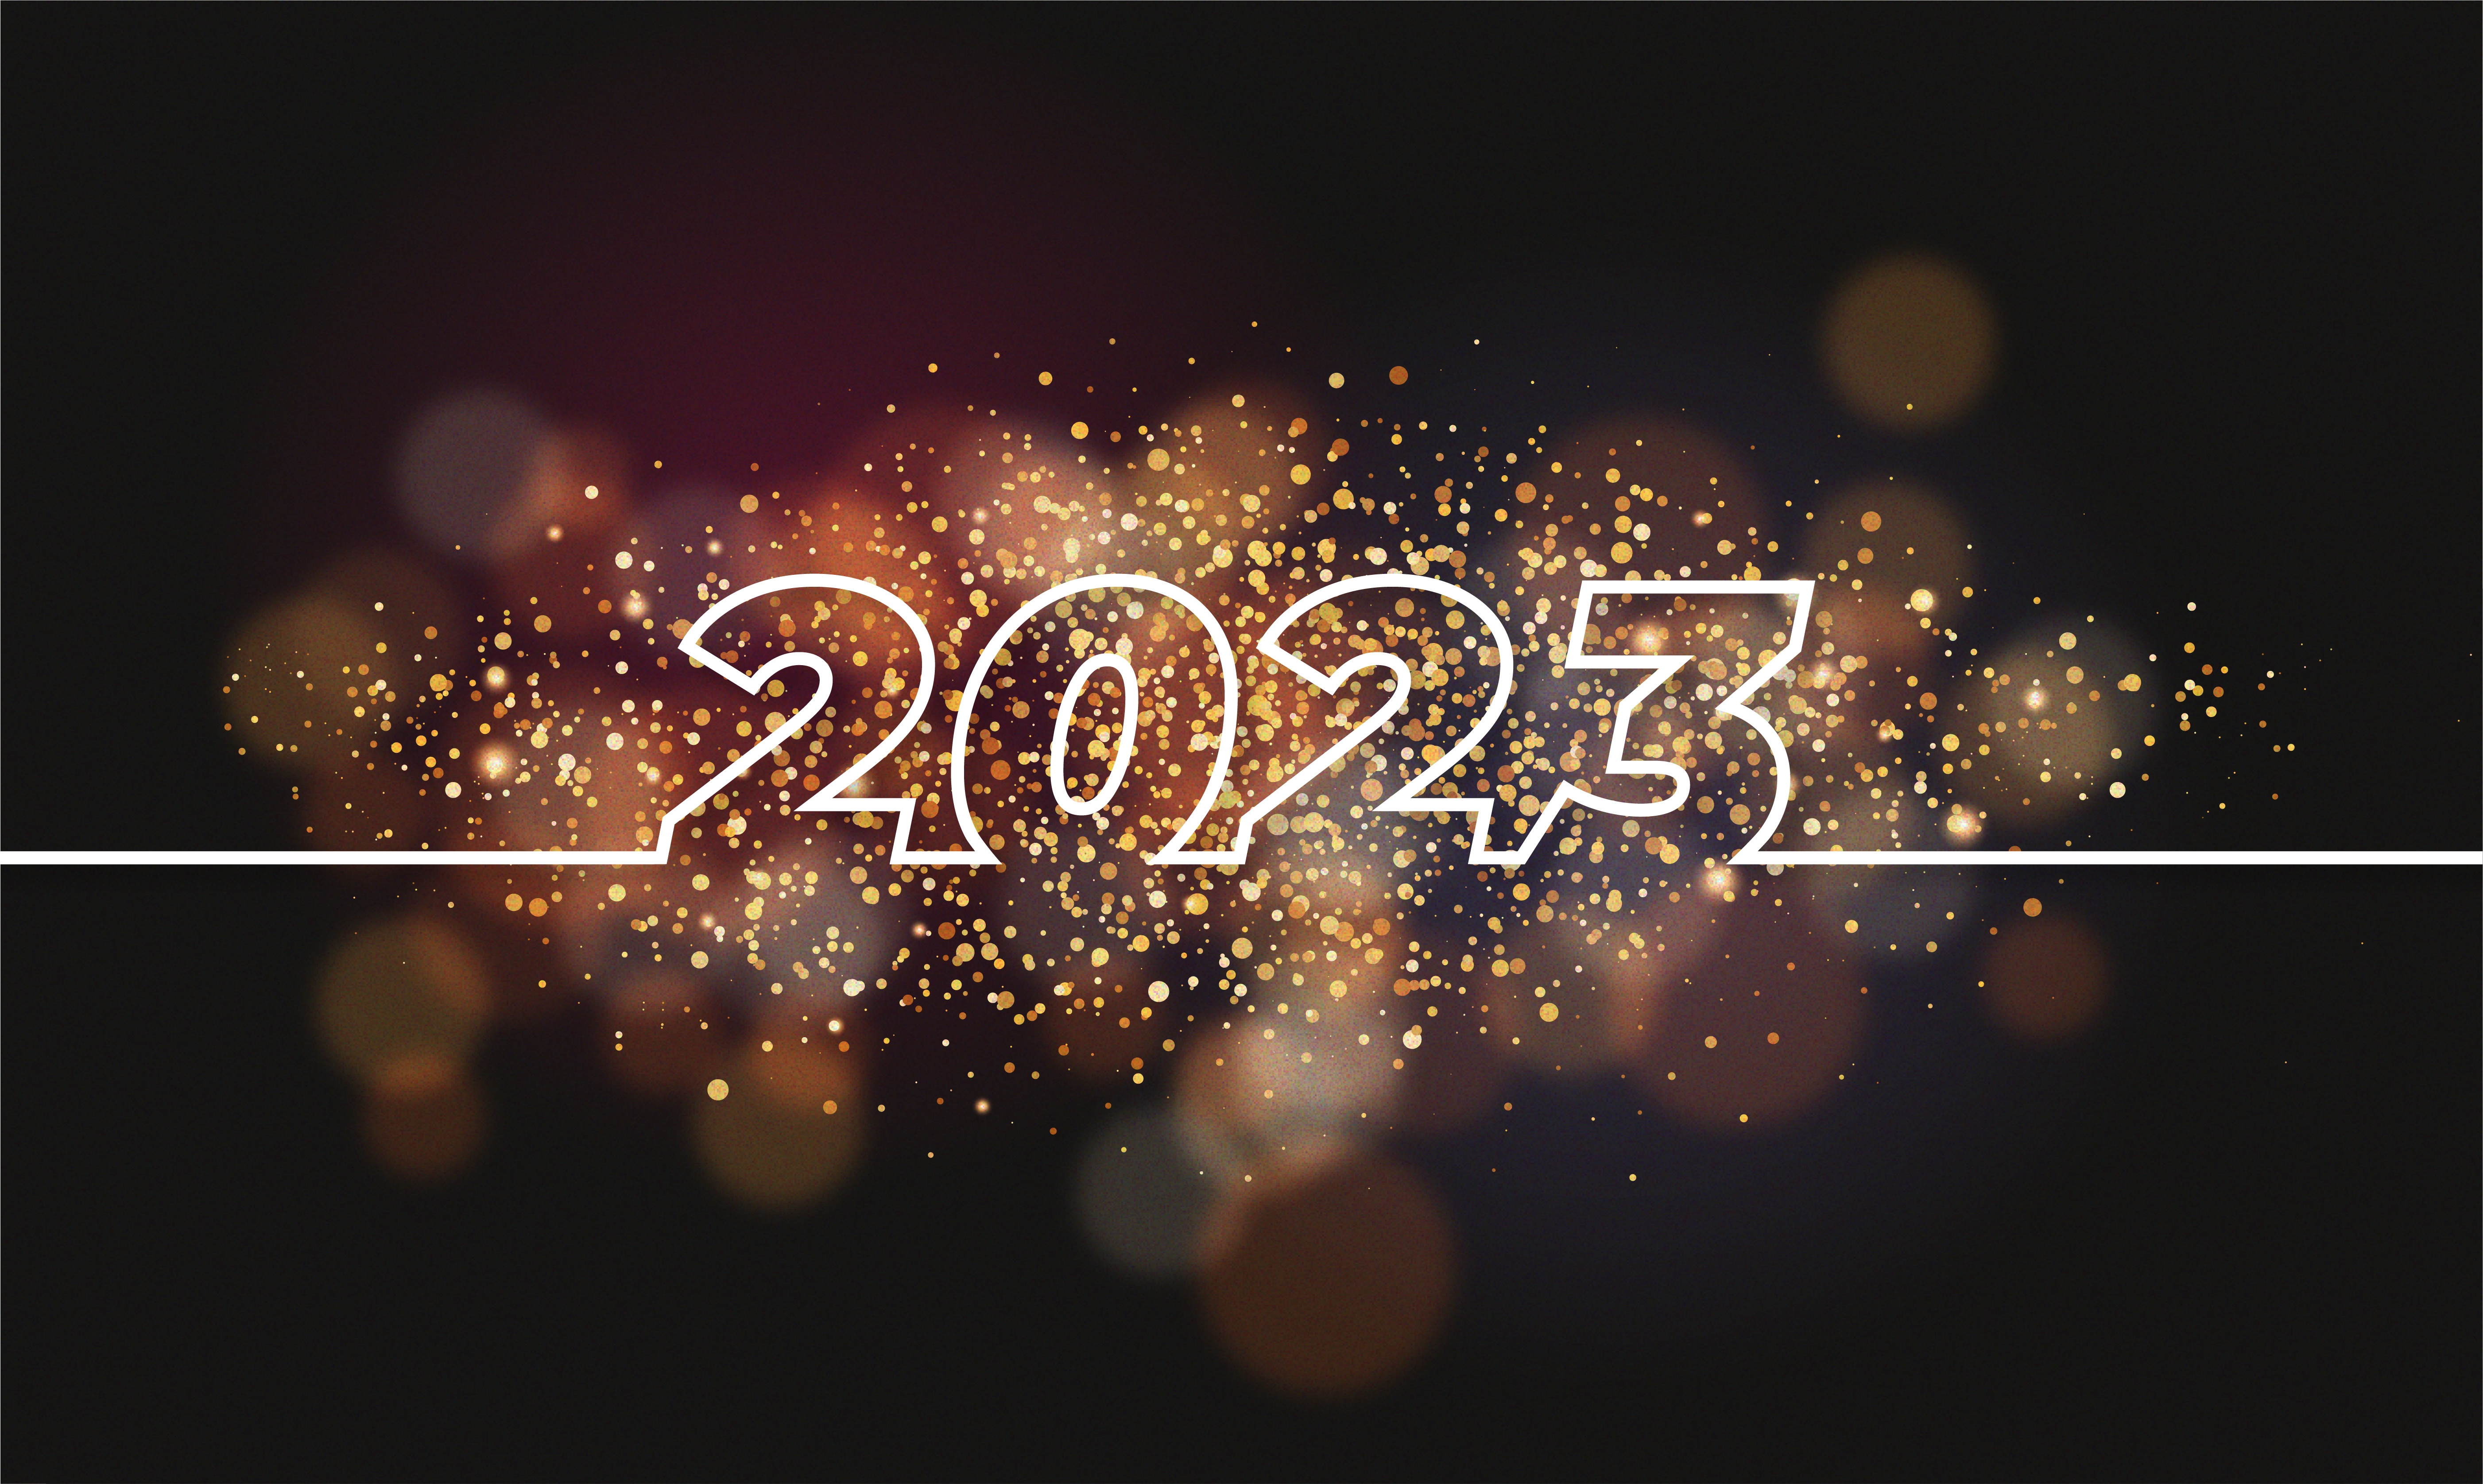 Happy New 2023 On Black Backround With Sparckless, Wallpaper13.com